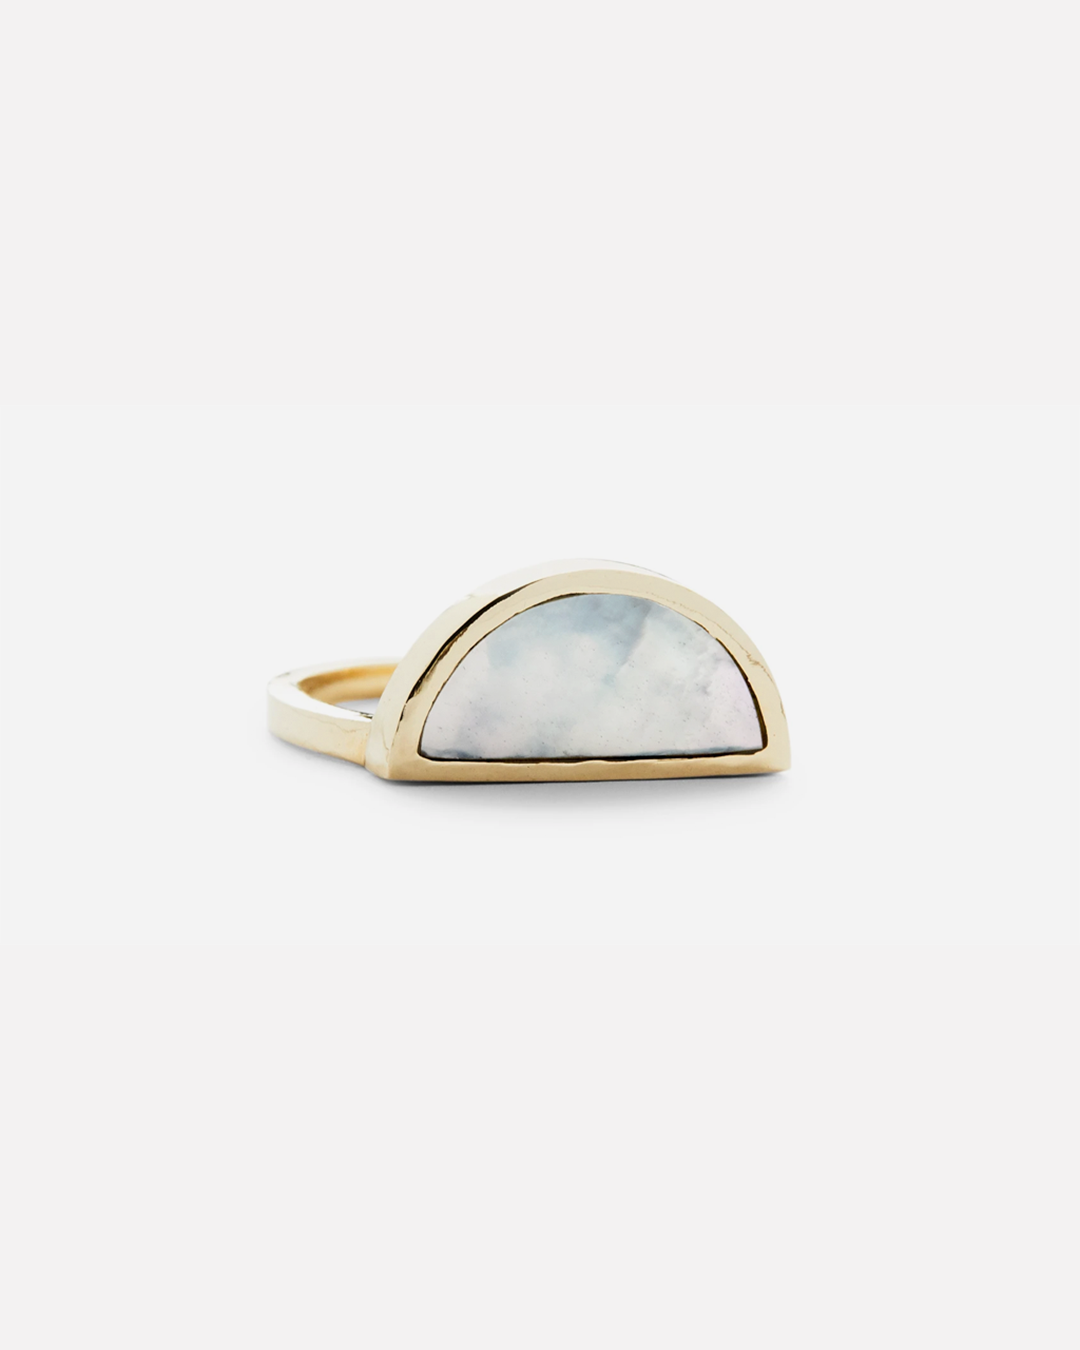 One Half / Mother of Pearl Ring By Casual Seance in rings Category